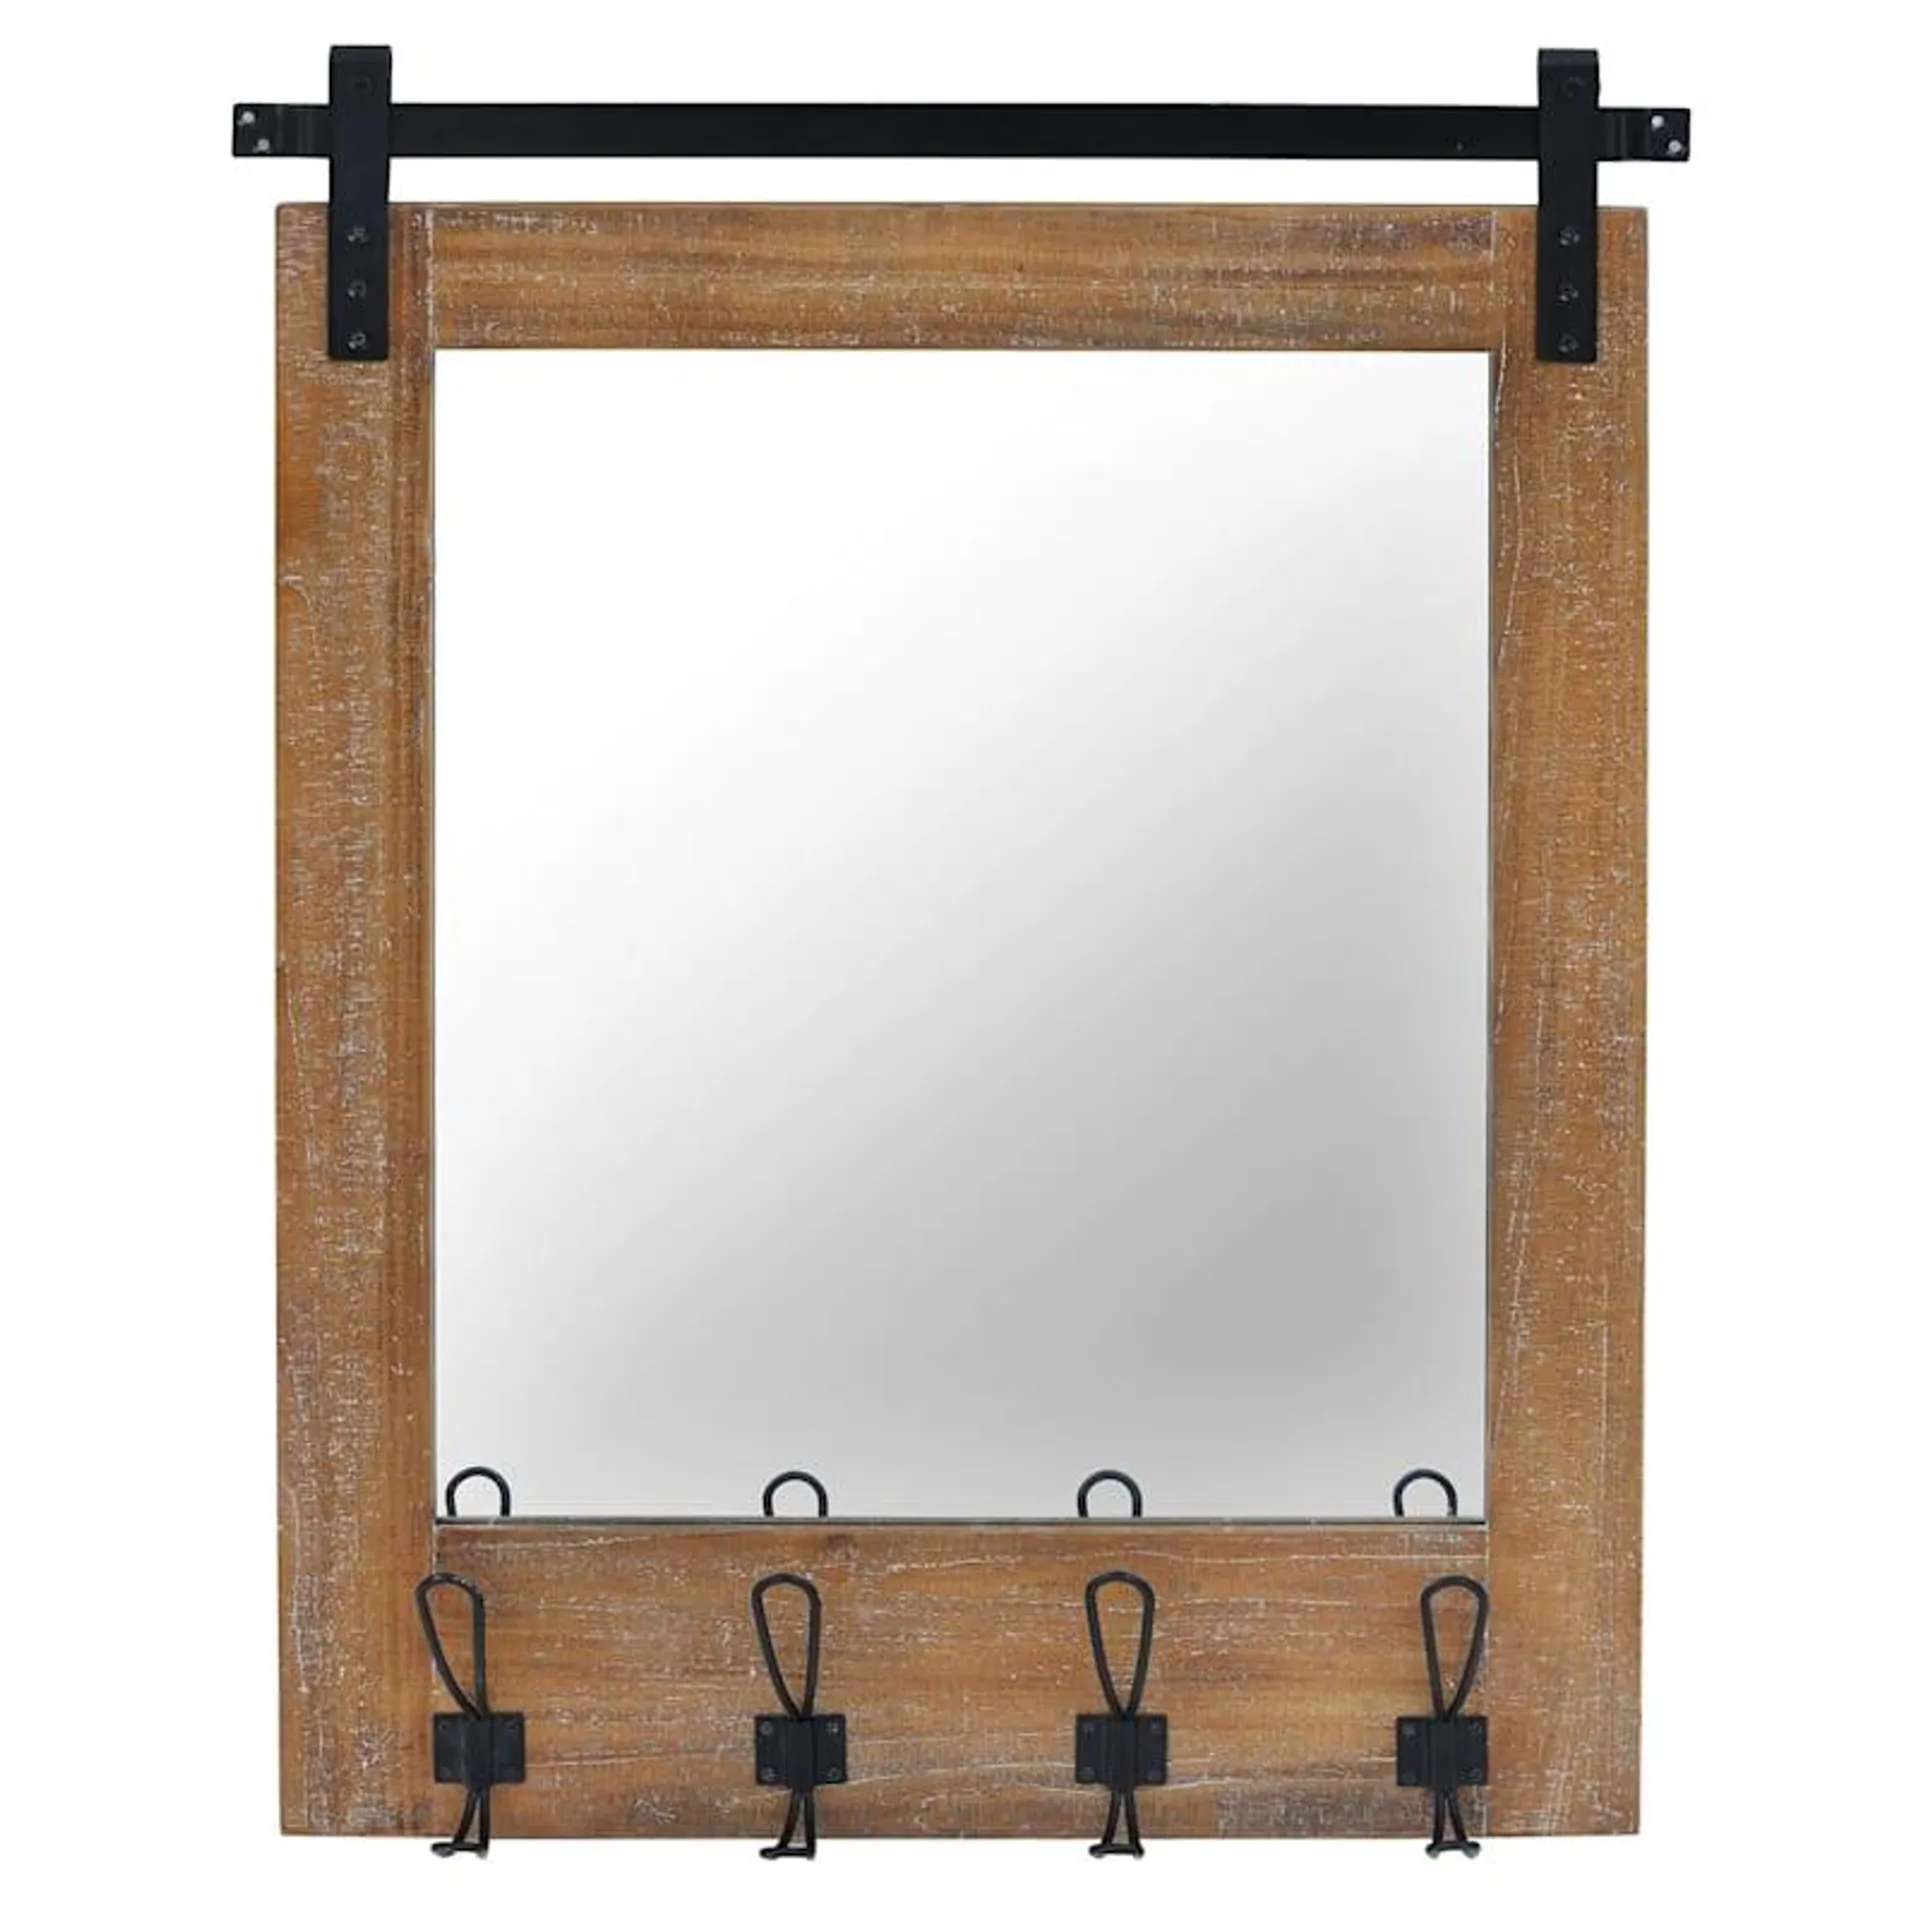 Metal with Hooks Rectangle Wall Mirror, 24x31